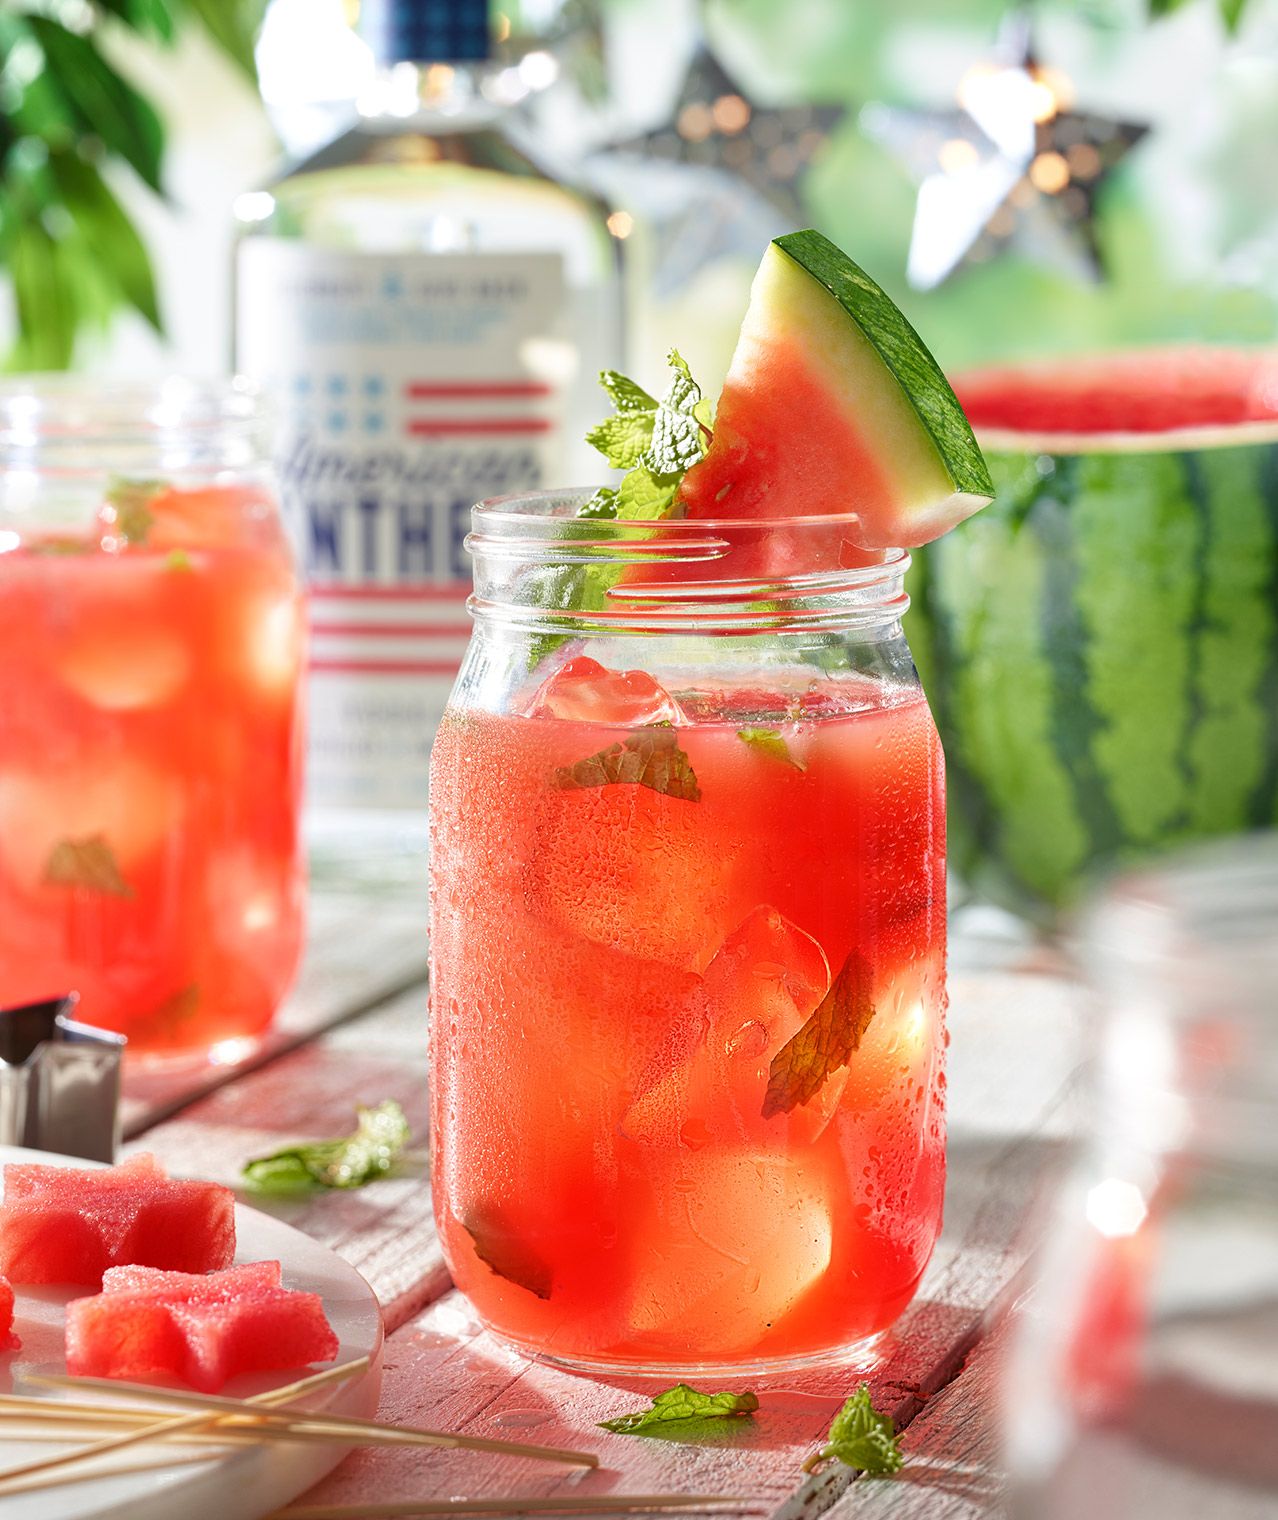 Learn how to make the Watermelon Smash cocktail drink ...